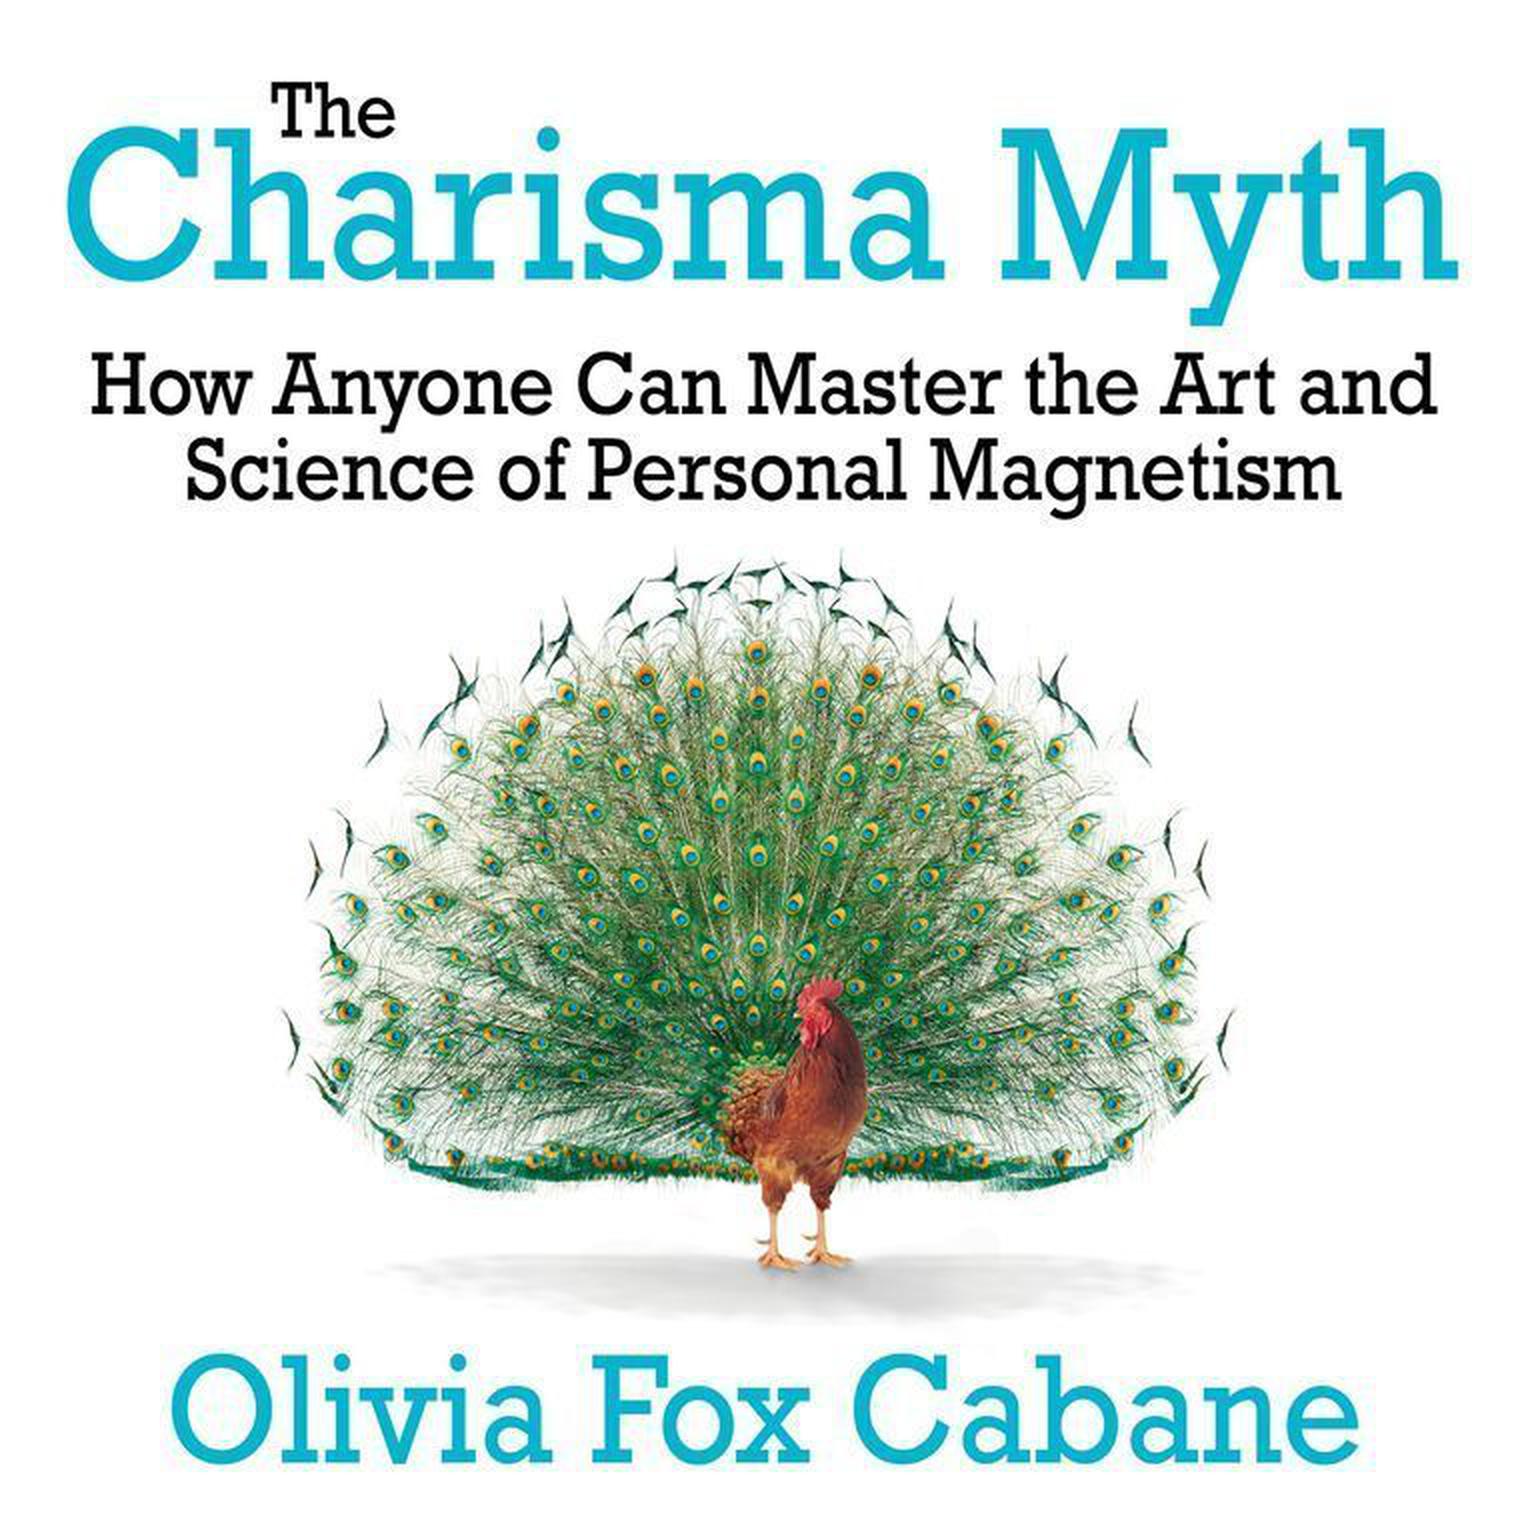 The Charisma Myth: How Anyone Can Master the Art and Science of Personal Magnetism (Intl Ed) Audiobook, by Olivia Fox Cabane